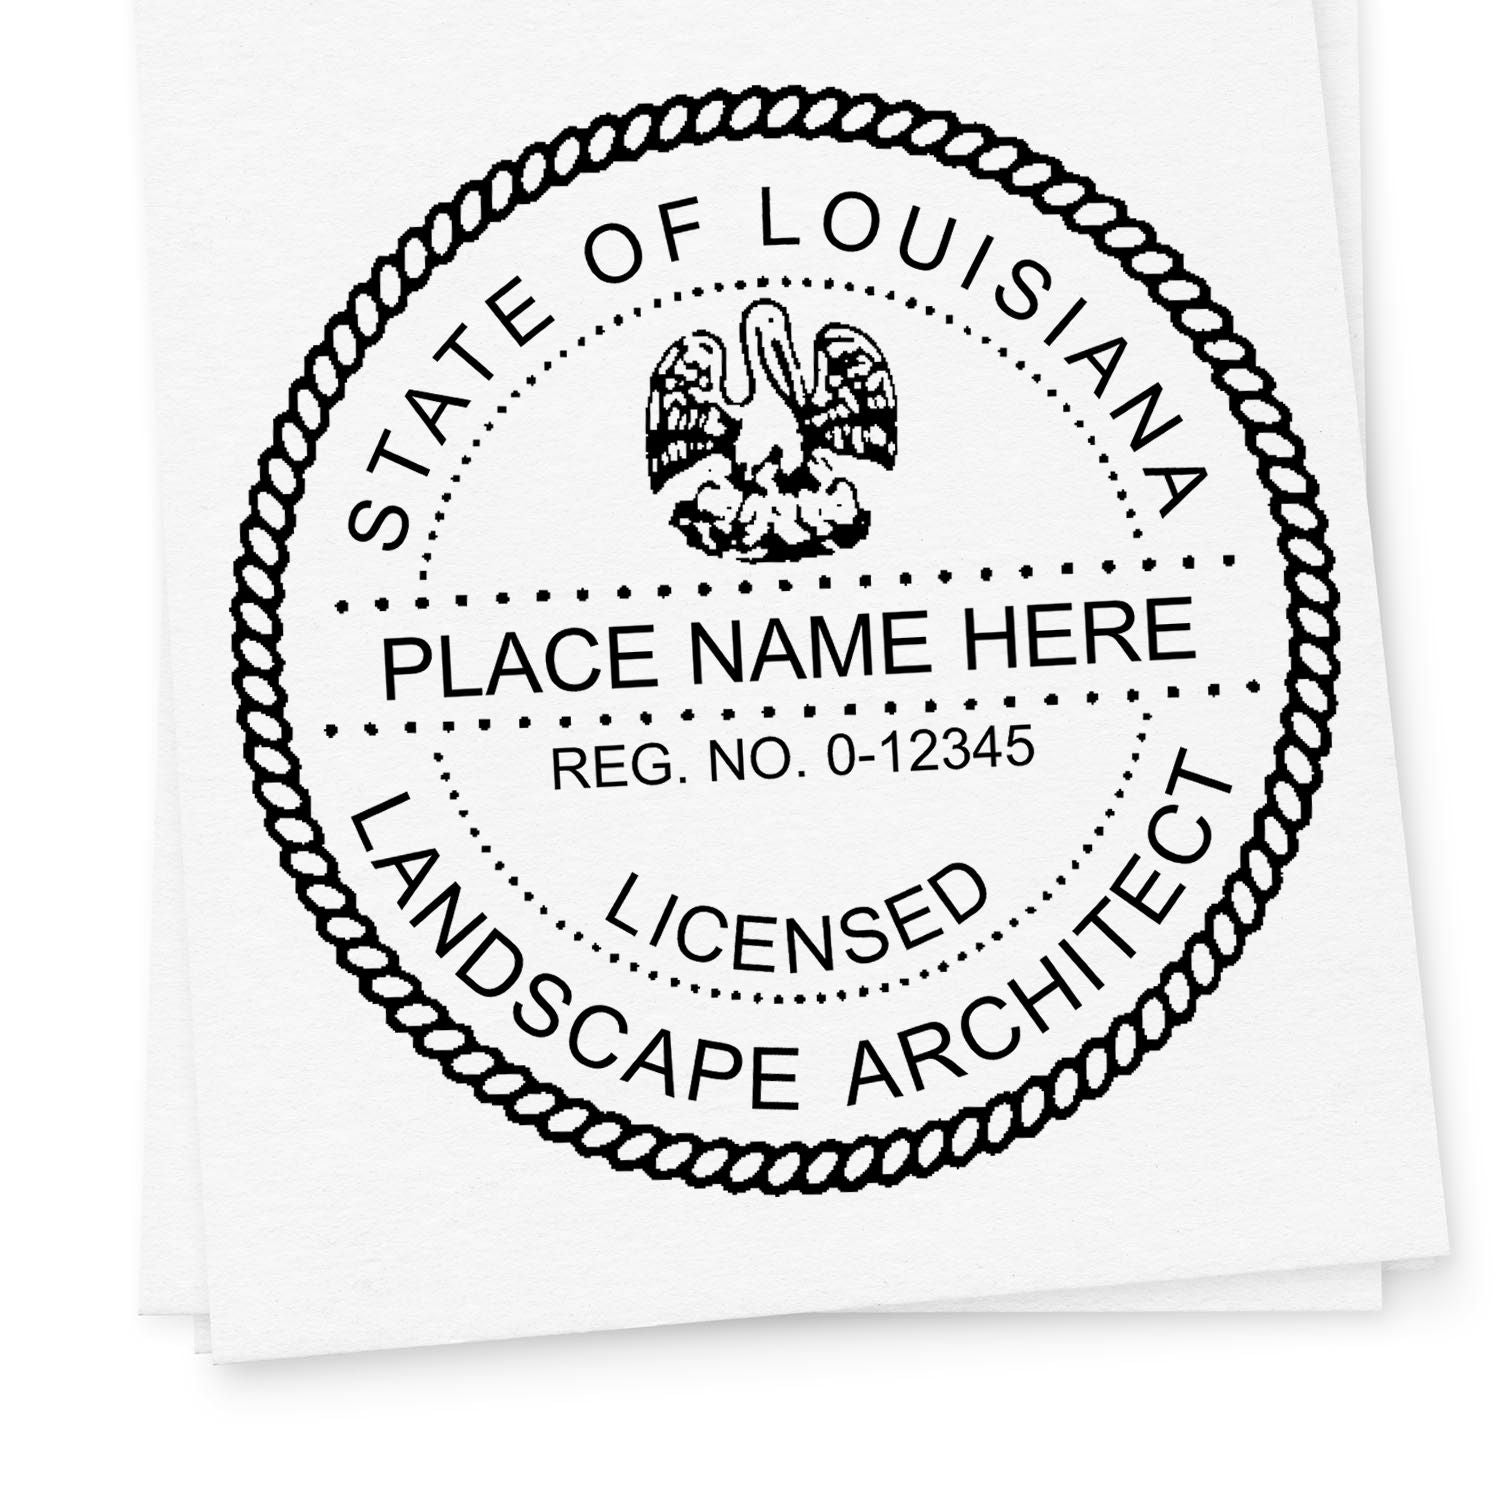 The main image for the Self-Inking Louisiana Landscape Architect Stamp depicting a sample of the imprint and electronic files